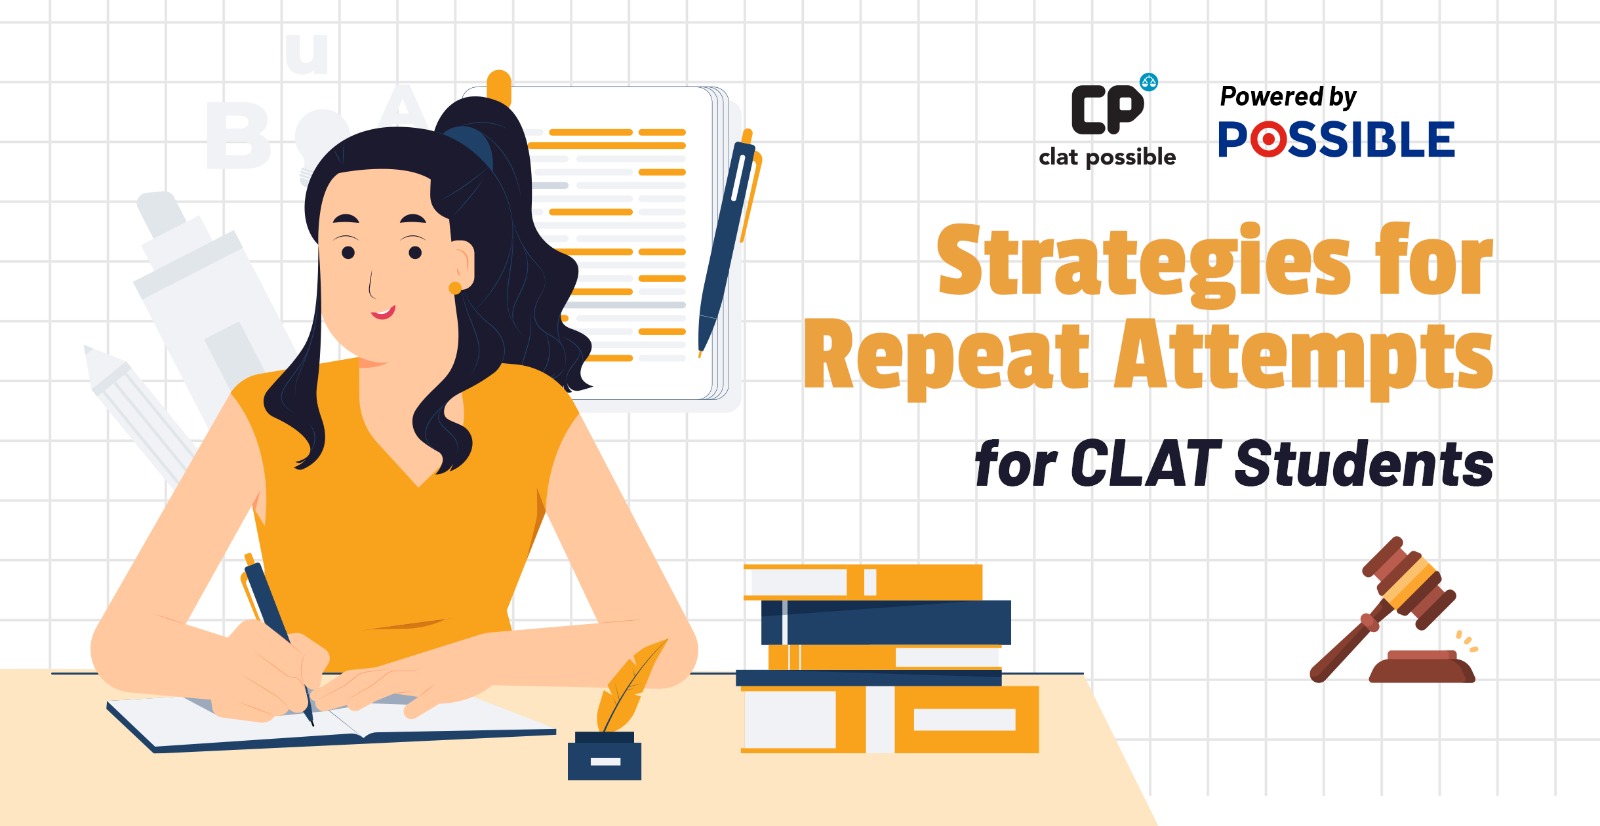 Strategies for Repeat Attempts for CLAT Students